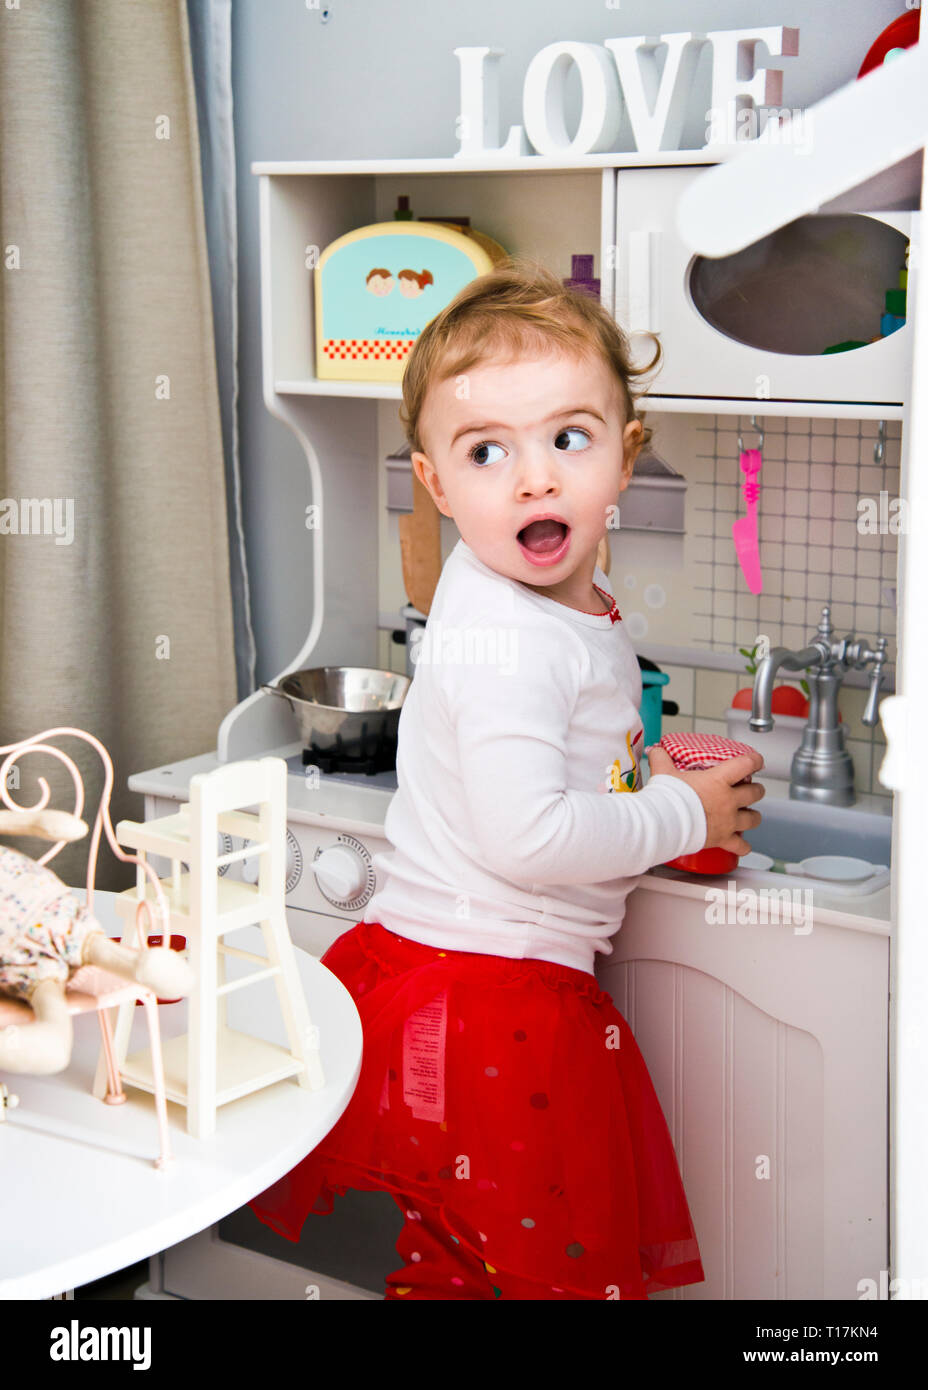 young Caucasian girl playing with toy kitchen at home. Stock Photo